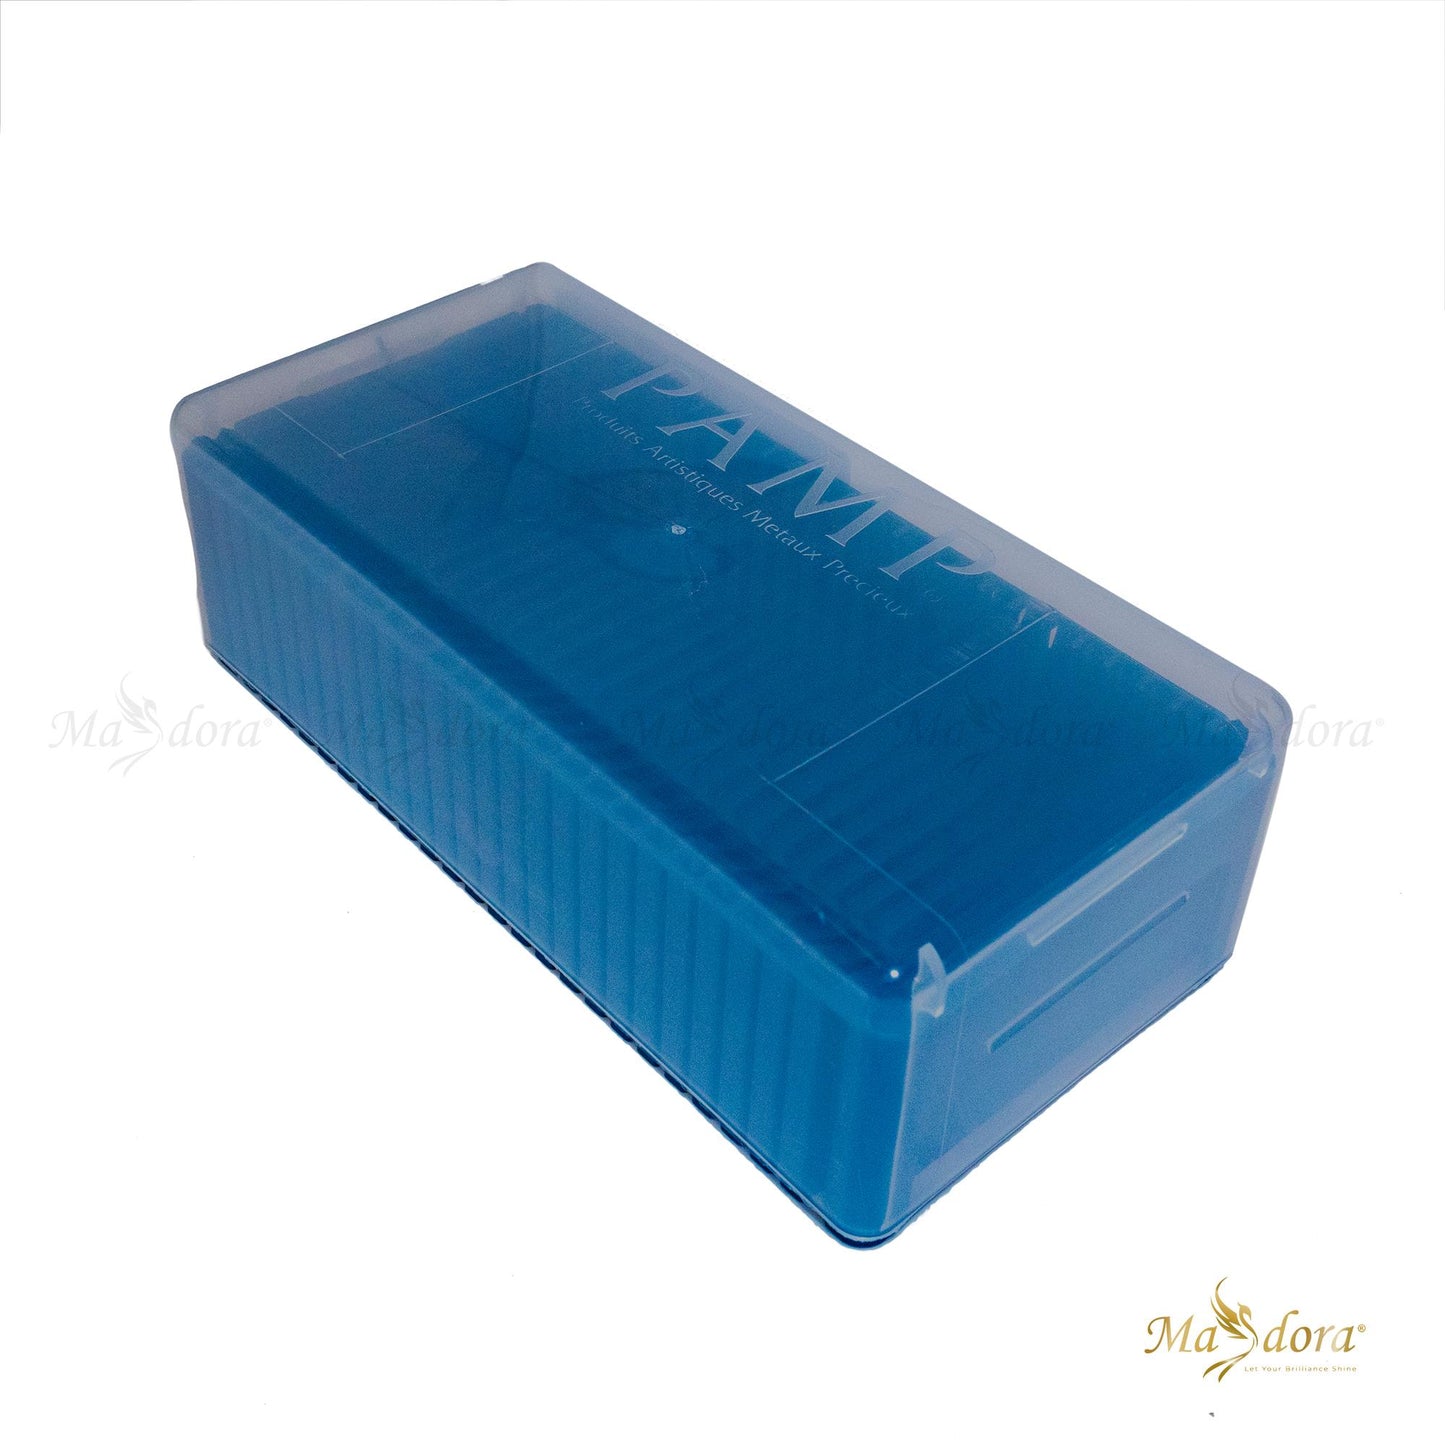 PAMP Suisse Gold Bar Storage Box for Gold Bar Collectors